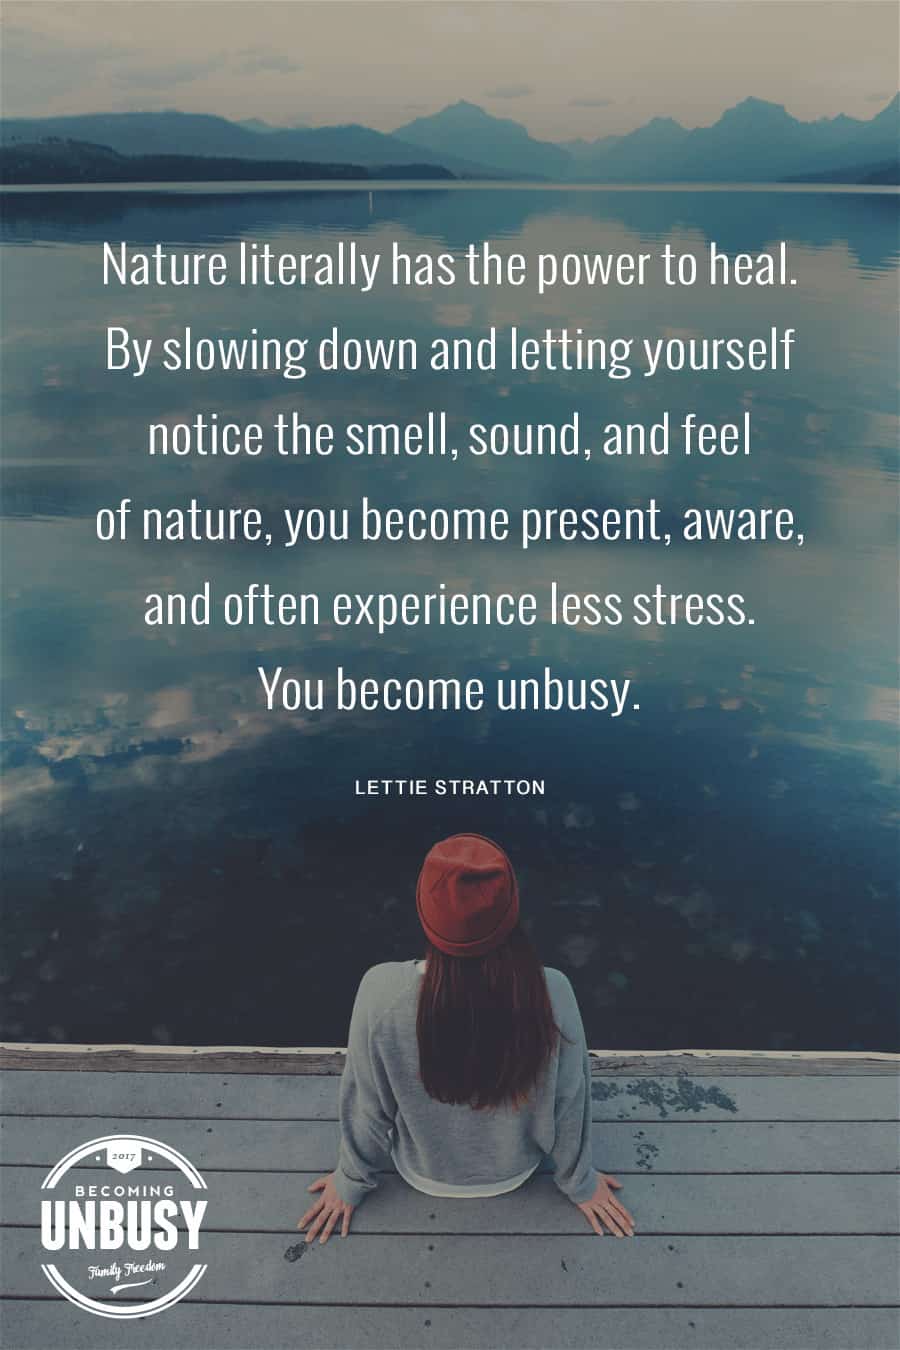 Nature literally has the power to heal. By slowing down and letting yourself notice the smell, sound, and feel of nature, you become present, aware, and often experience less stress. You become unbusy. #quote #becomingunbusy #unbusy #slowliving #nature *Love this quote, article, and website!